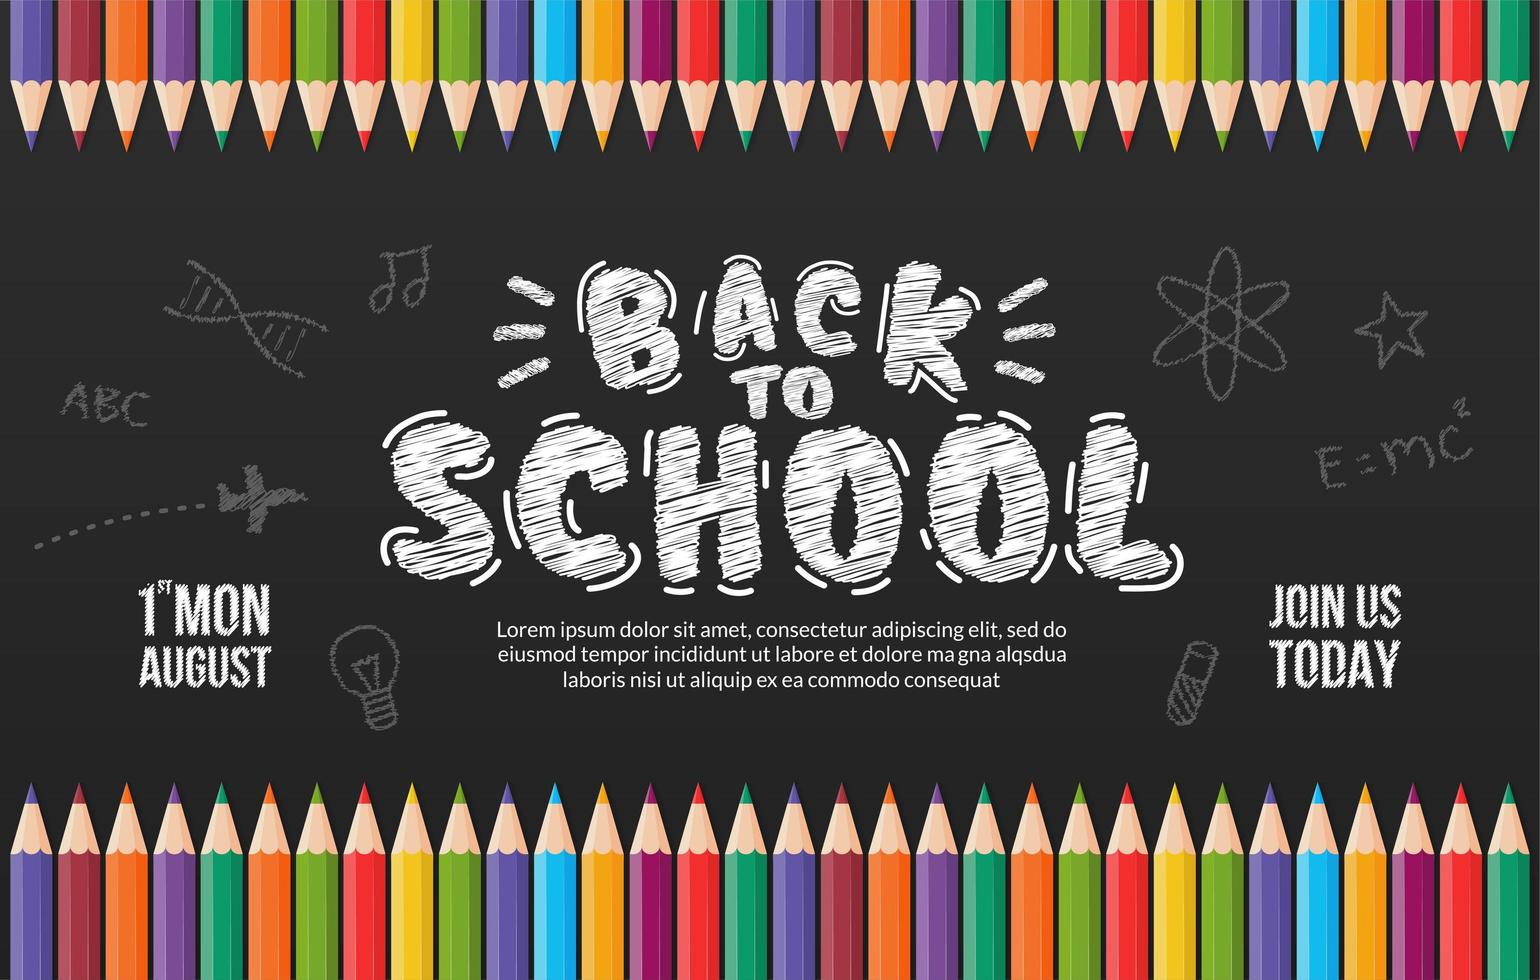 Welcome back to school background with colour pencils, Concept of education banner with back to School lettering design vector